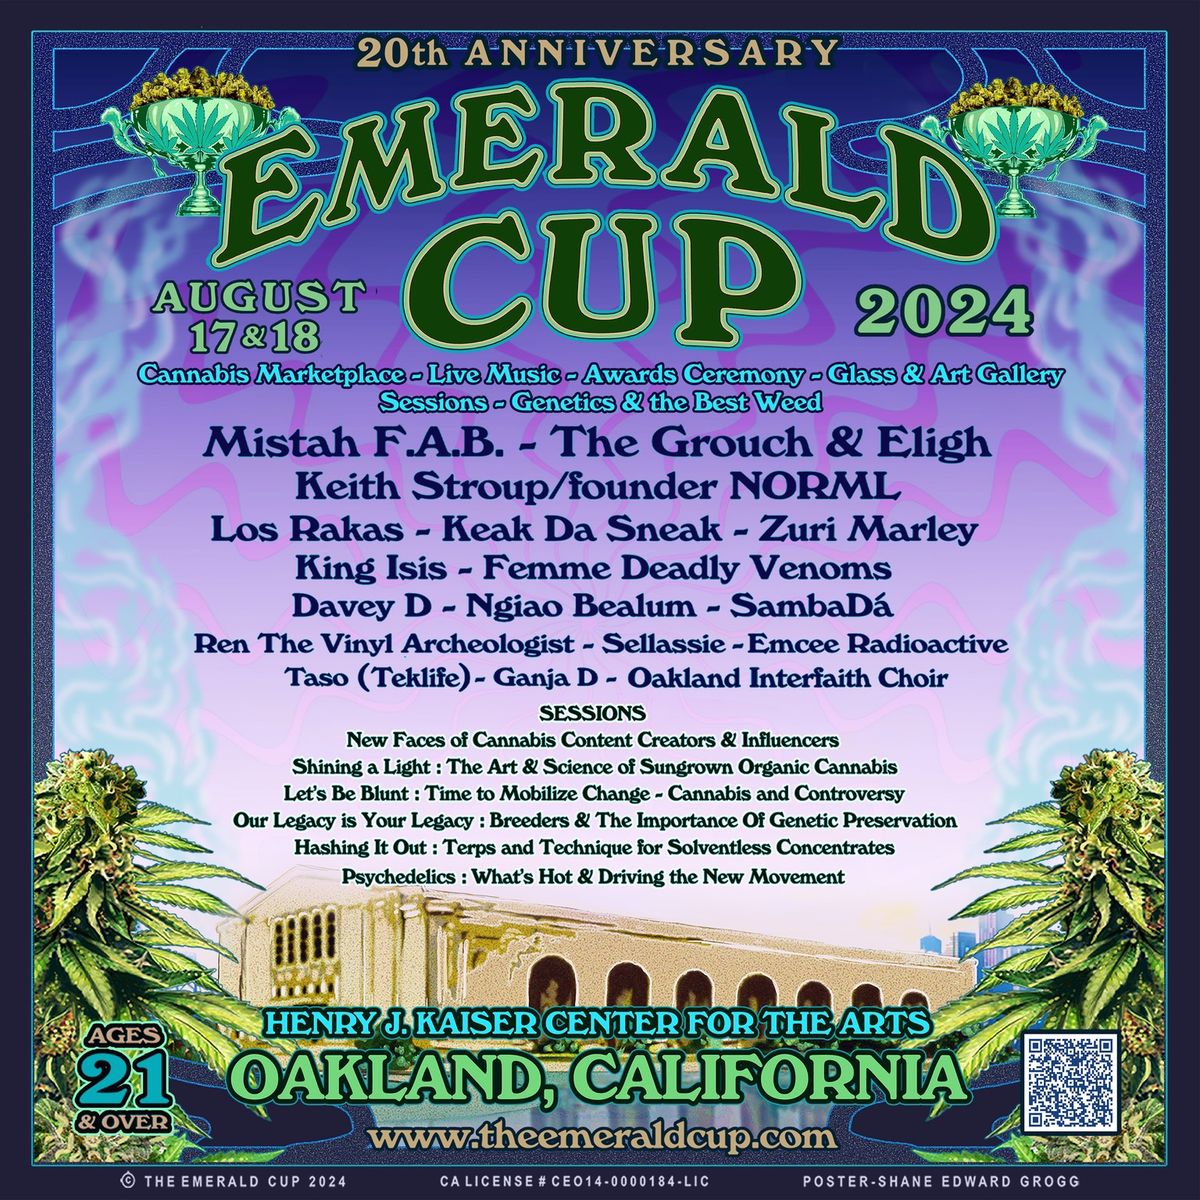 The 20th Anniversary of the Emerald Cup